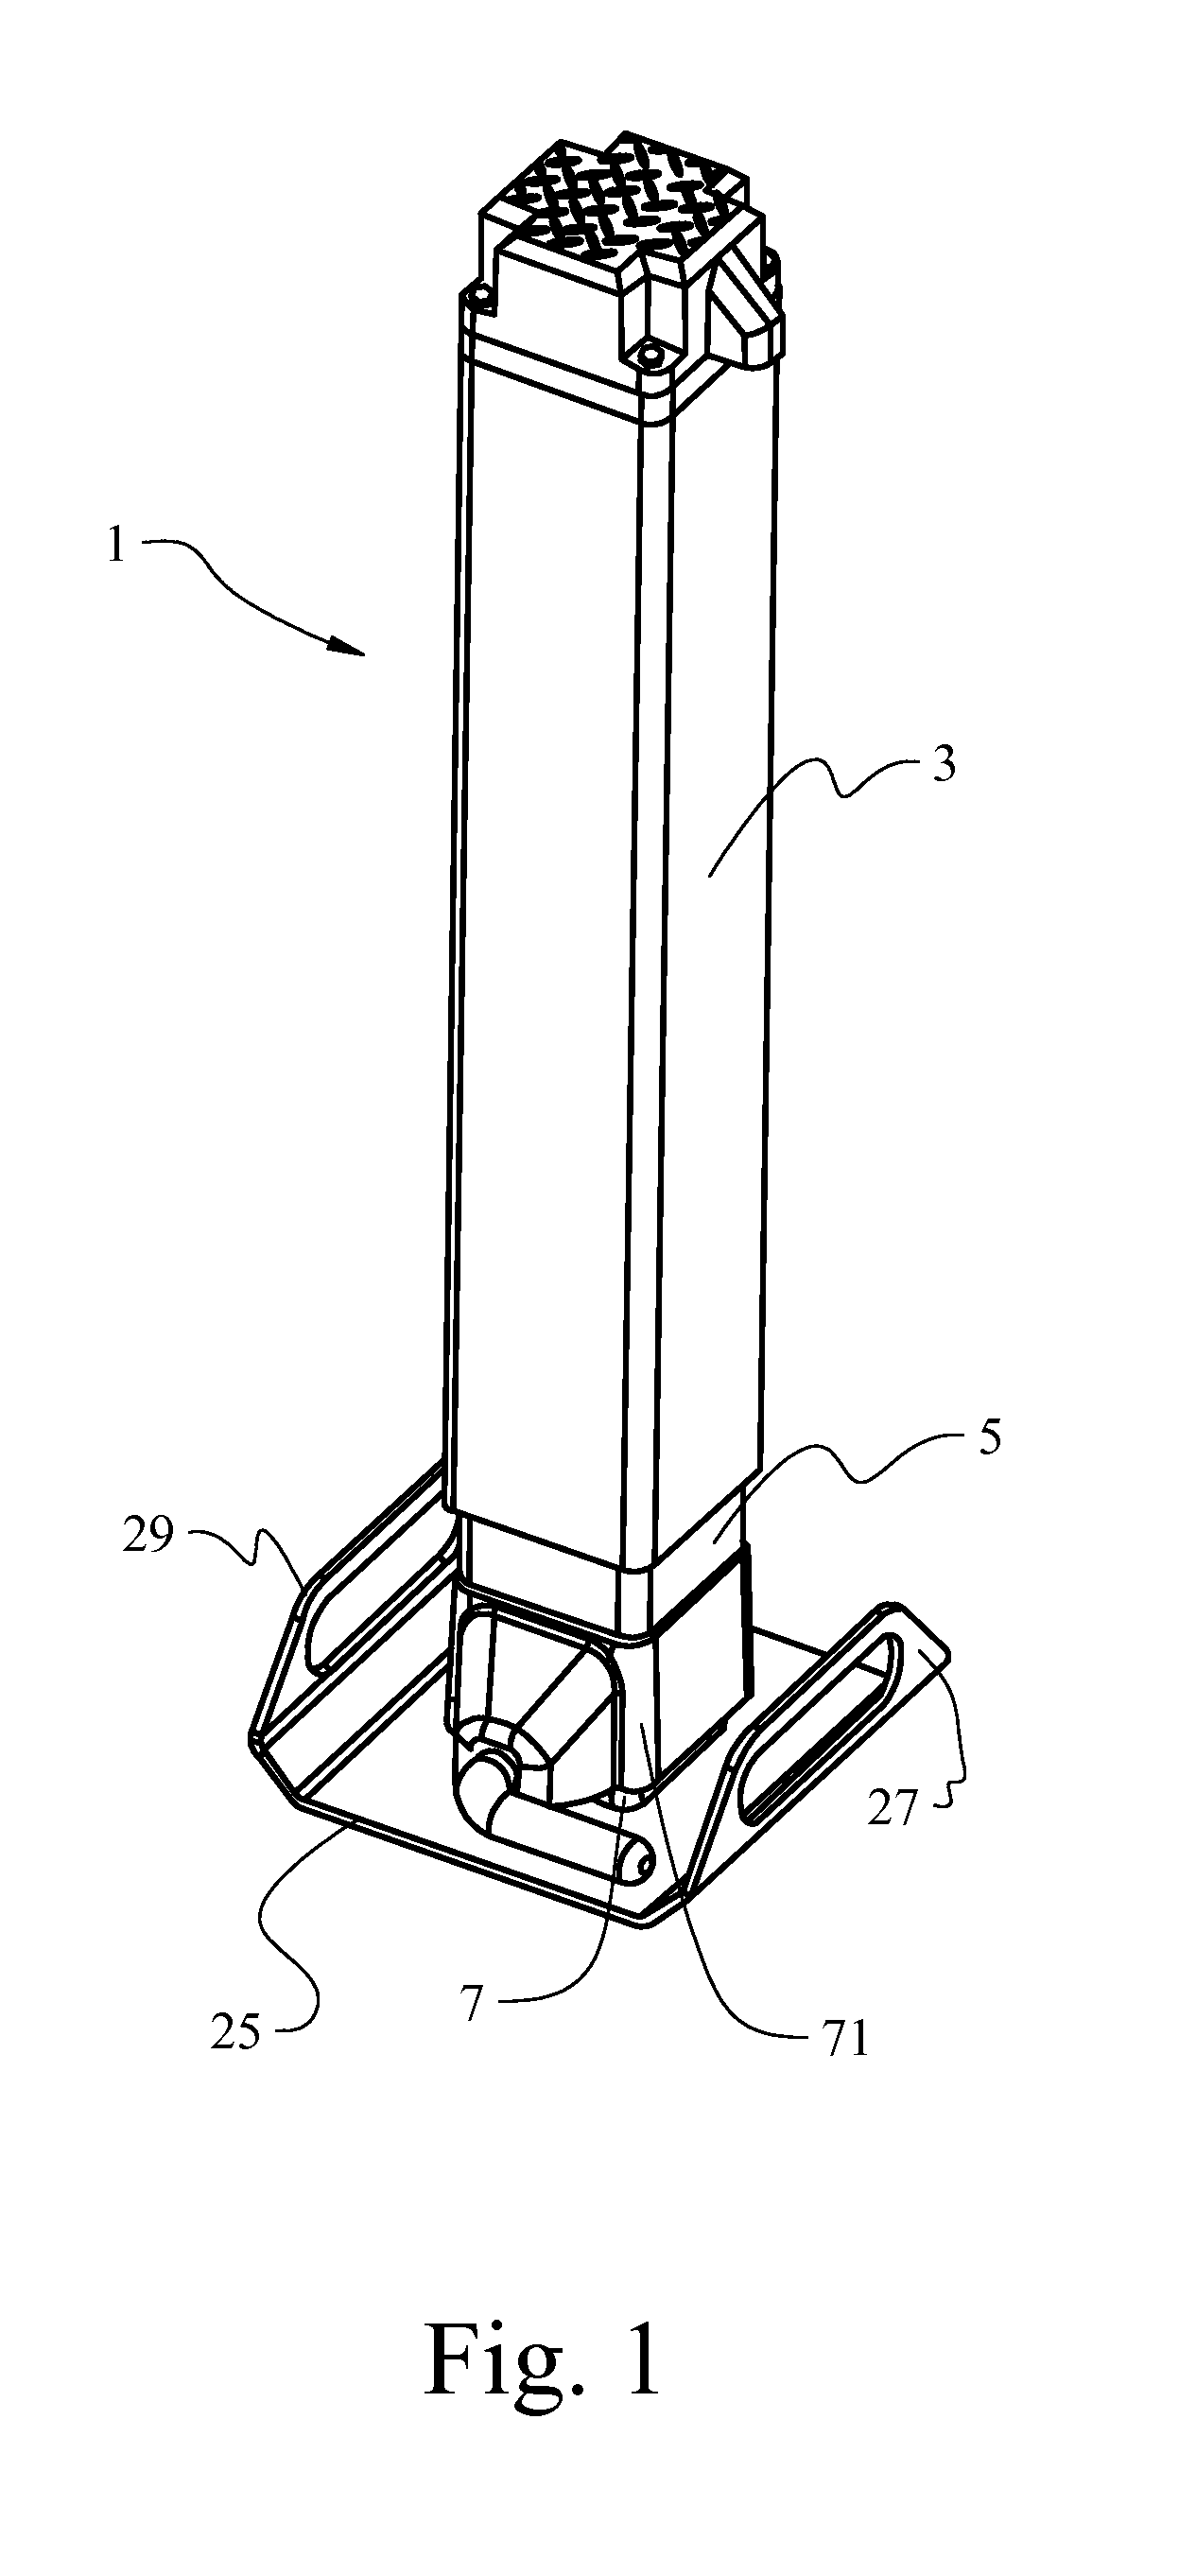 Self-retracting hydraulic jack assembly